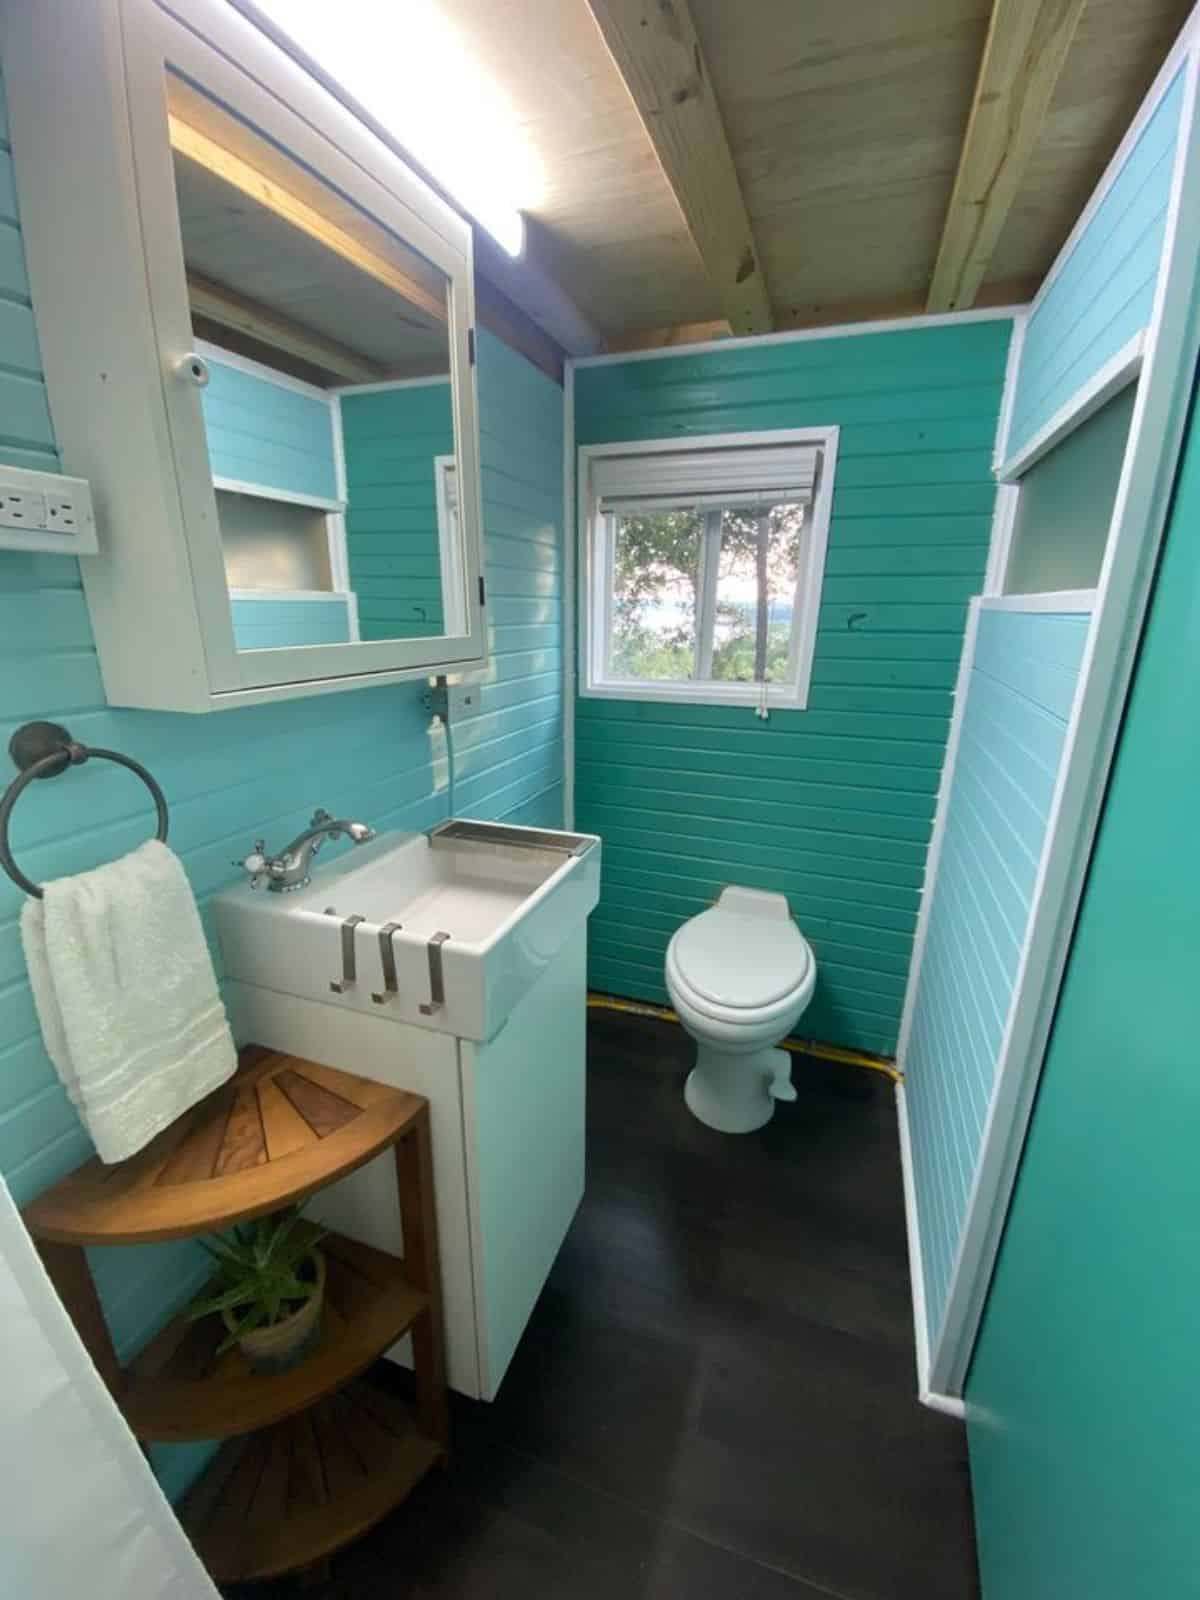 standard fittings in the bathroom of 20’ tiny home